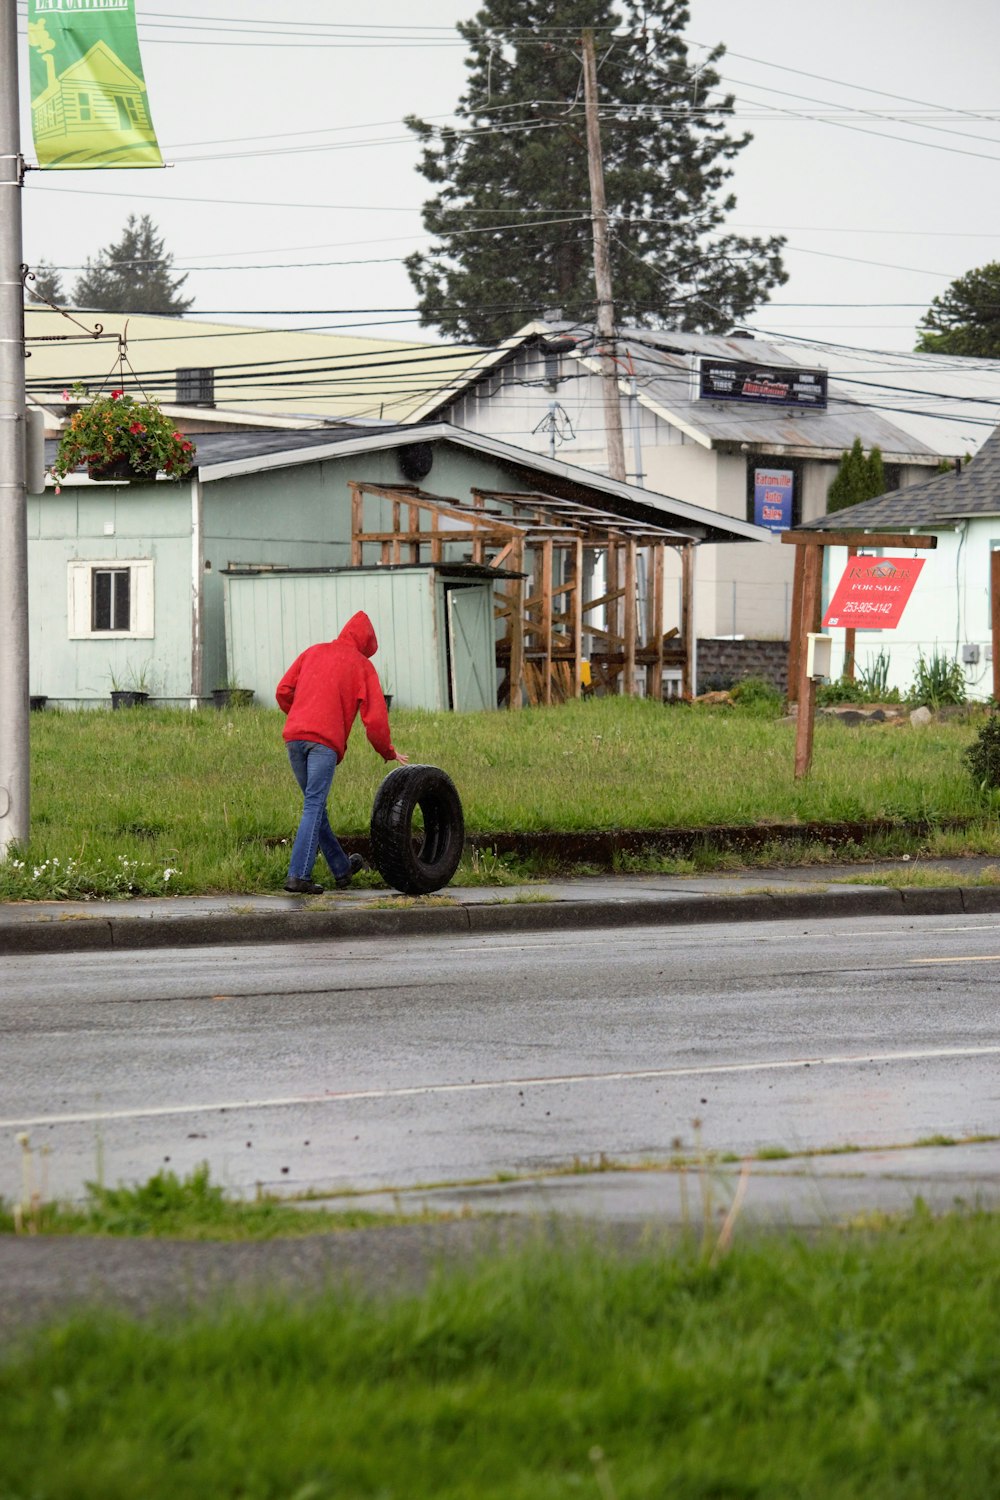 a person in a red jacket pushing a tire down a street